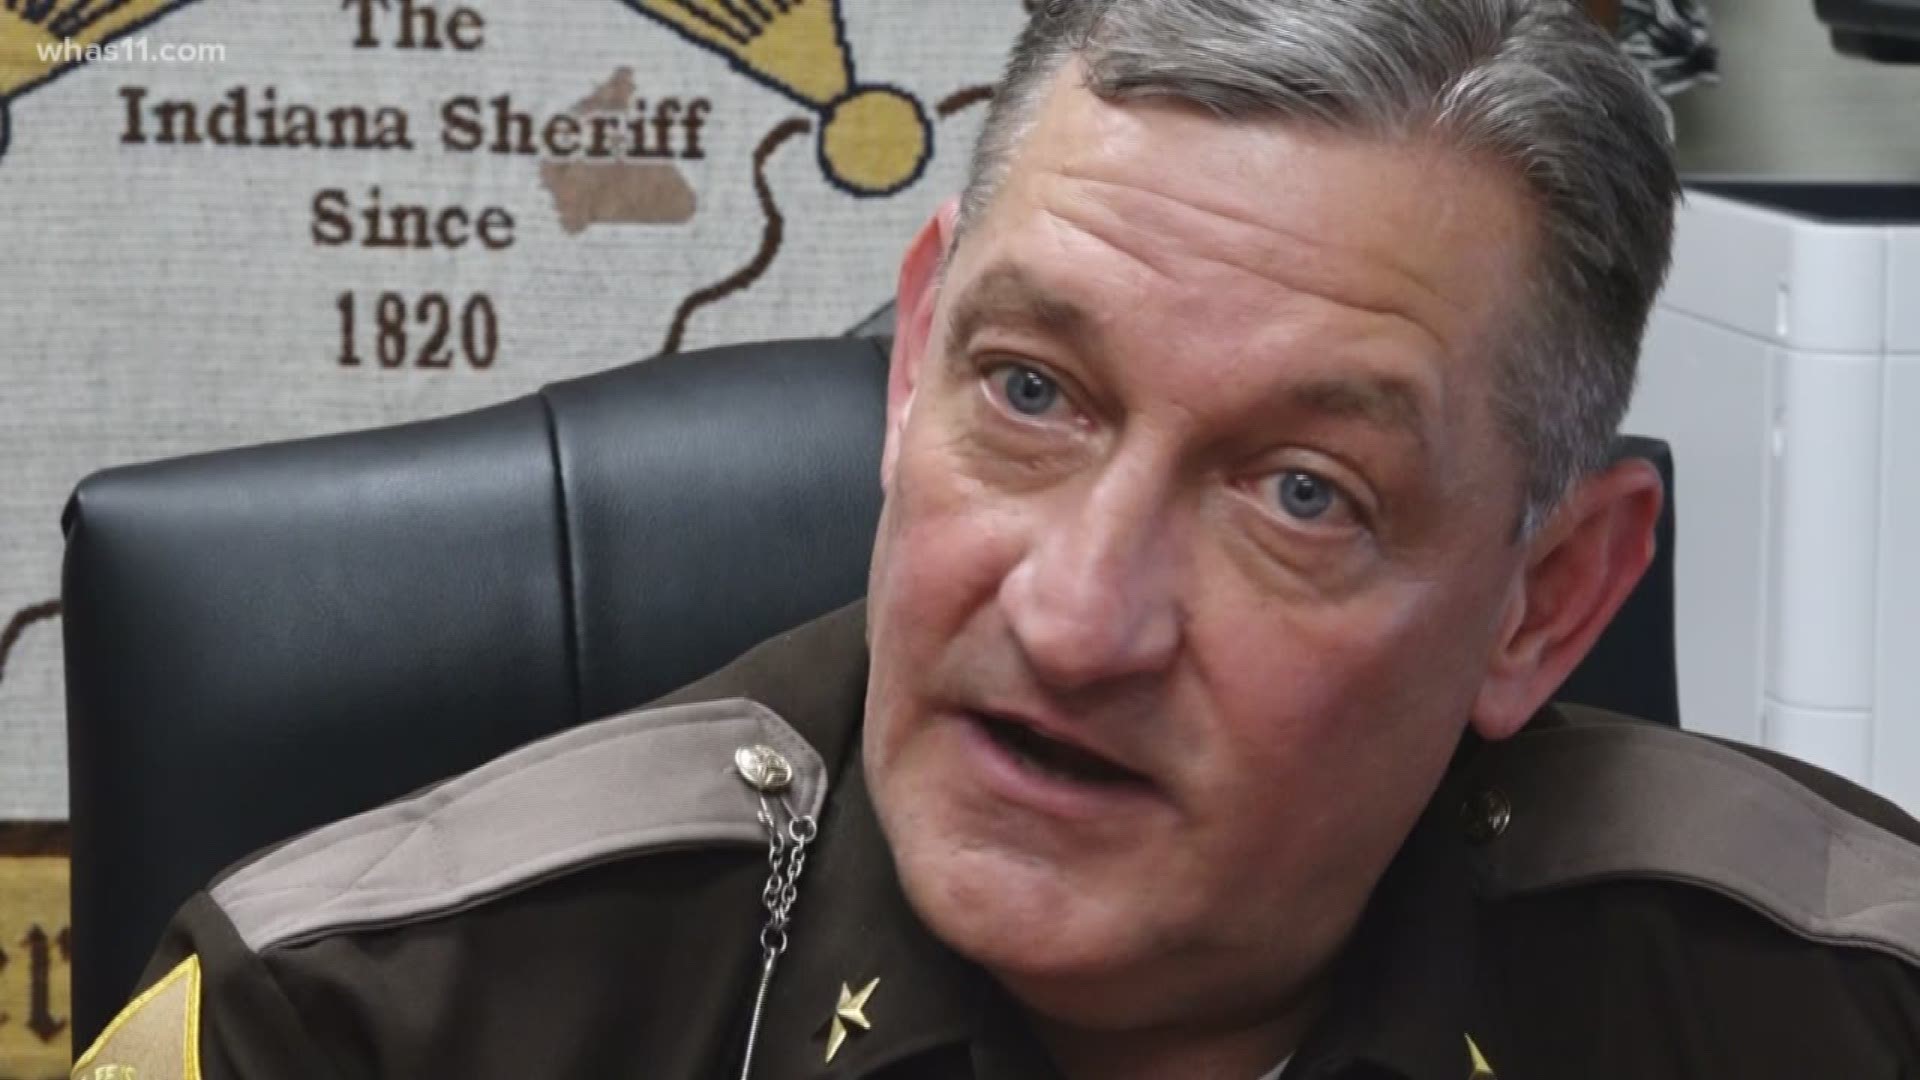 Sheriff Jerry Goodin is putting handcuffs on anyone who uses or sells in Scott County, Ind., and since he took office in January, his office has been busy.